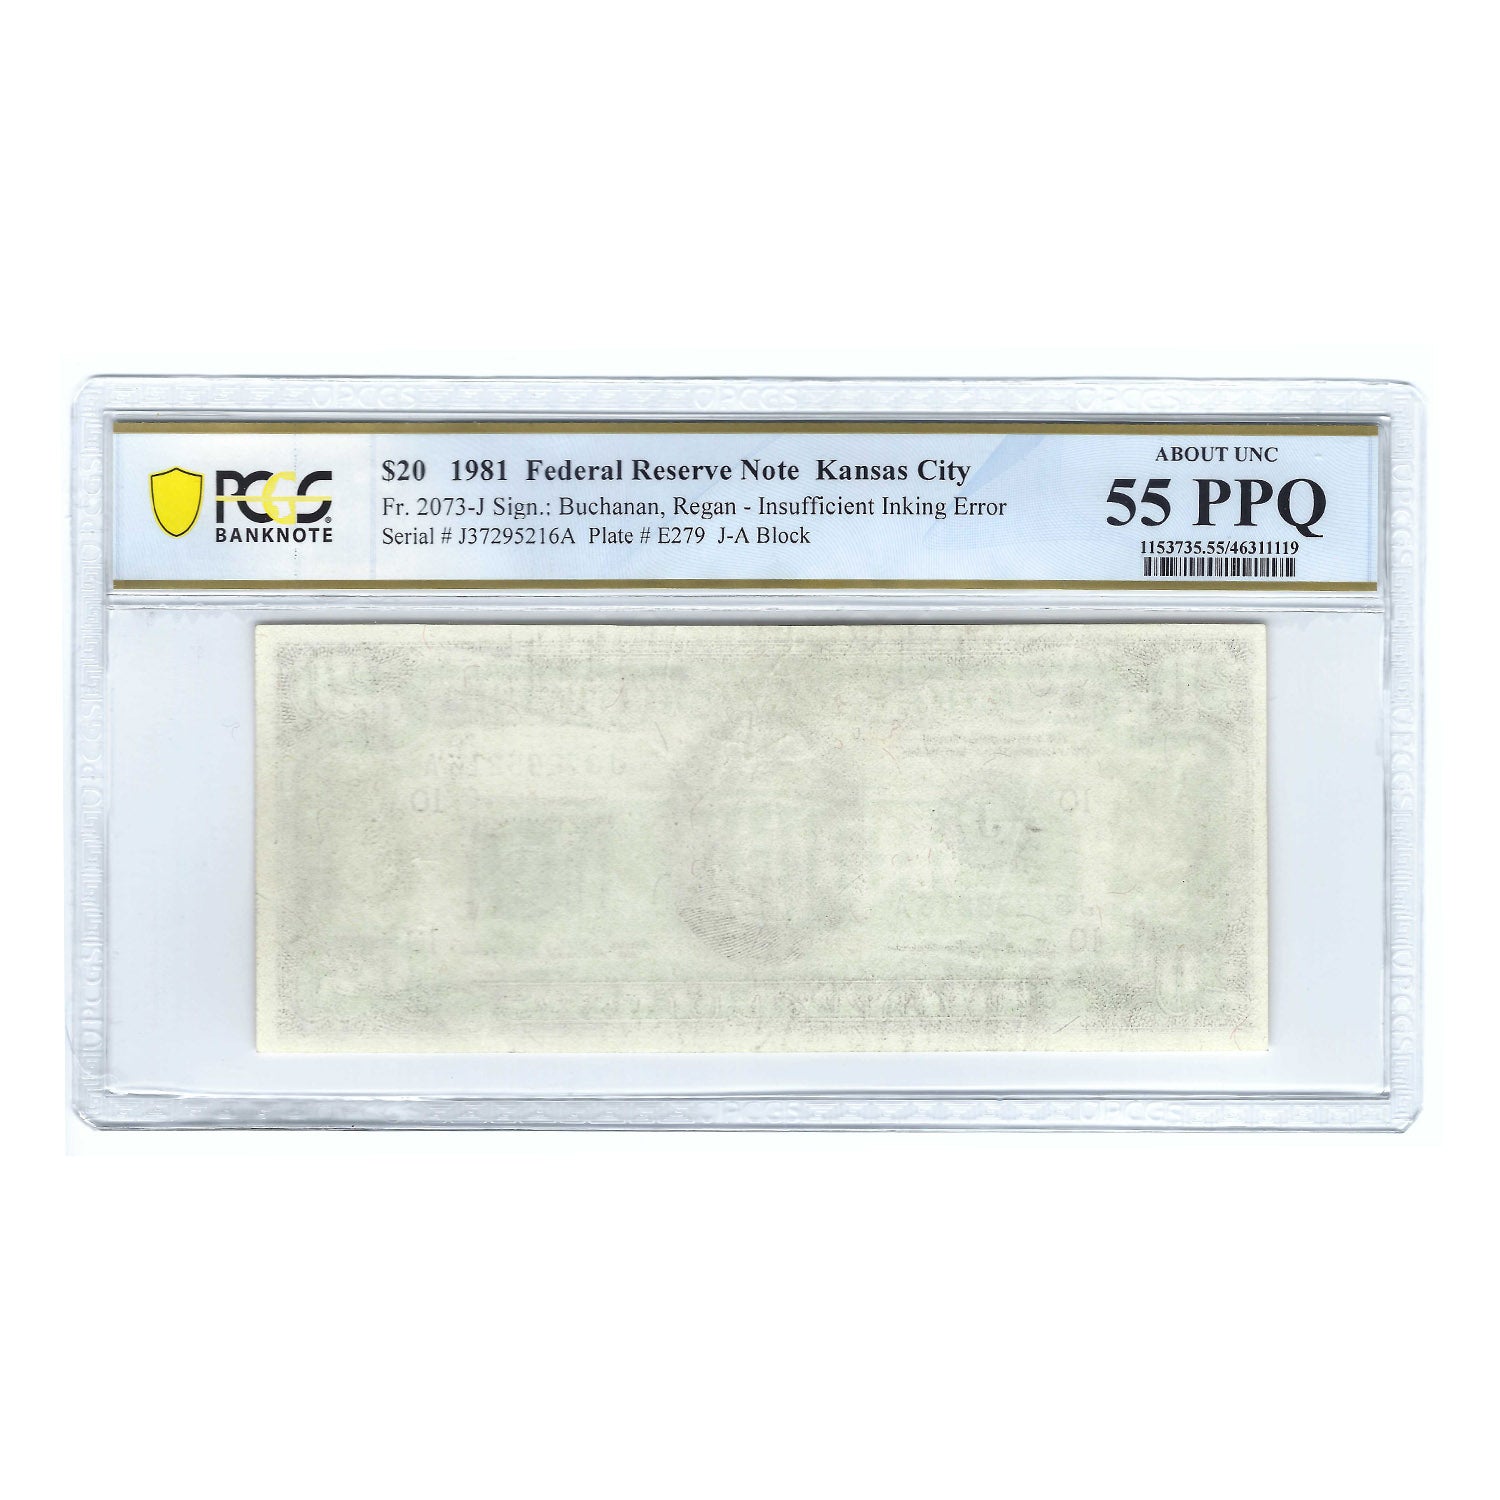 1981 $20 Sm Size Federal Reserve Note, Insufficient Inking Error PCGS About Unc 55 PPQ